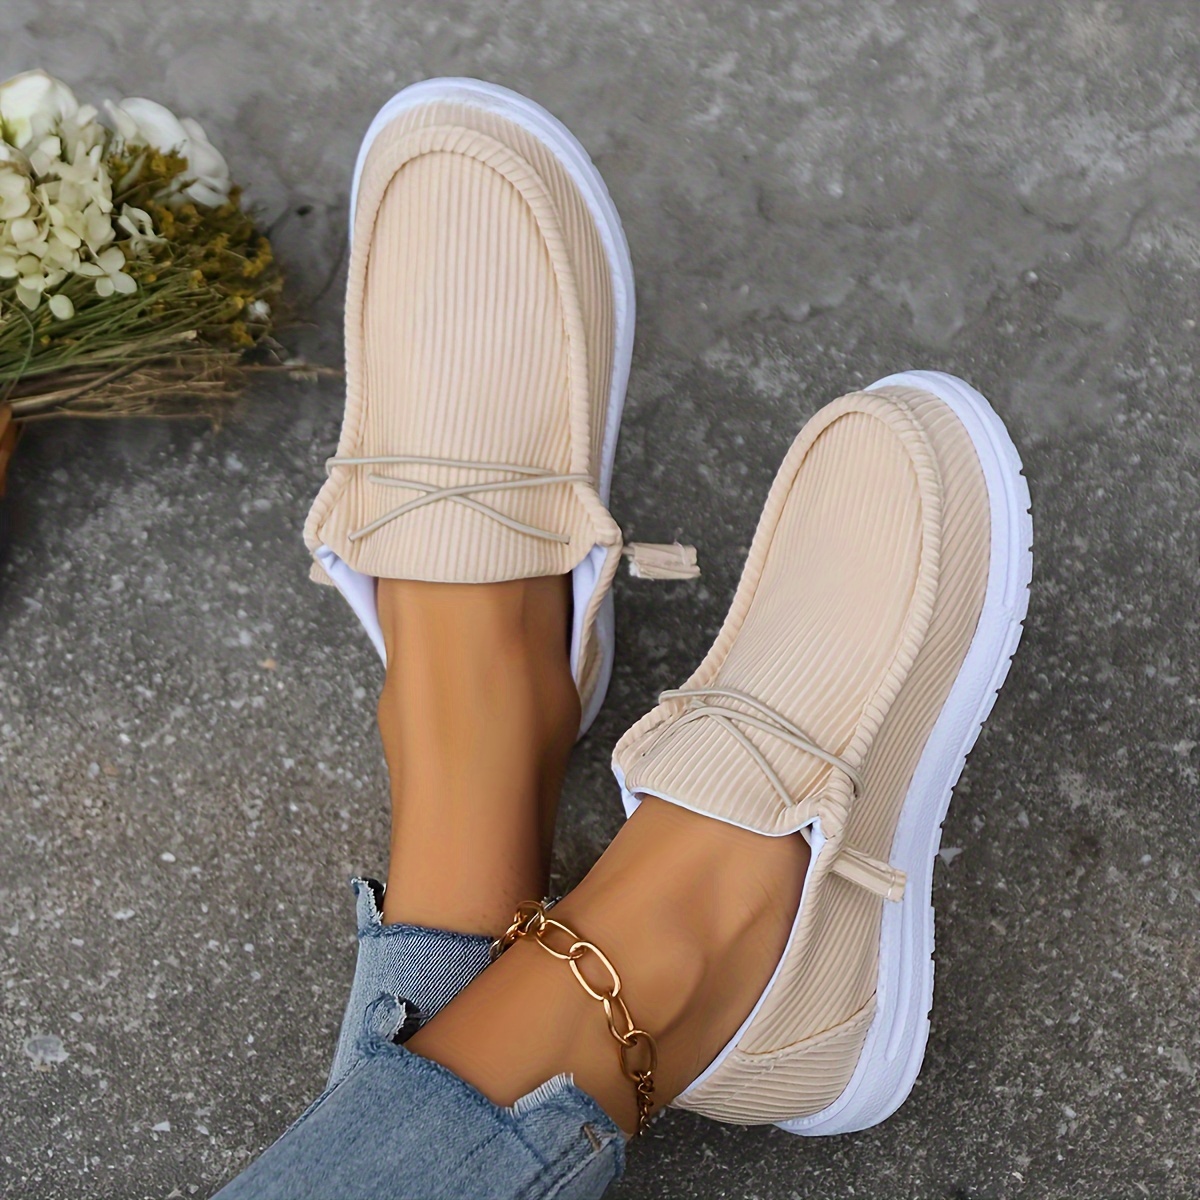 Women s Solid Color Casual Sneakers, Slip On Lightweight Soft Sole Walking Shoes, Low-top Comfort Daily Footwear details 1